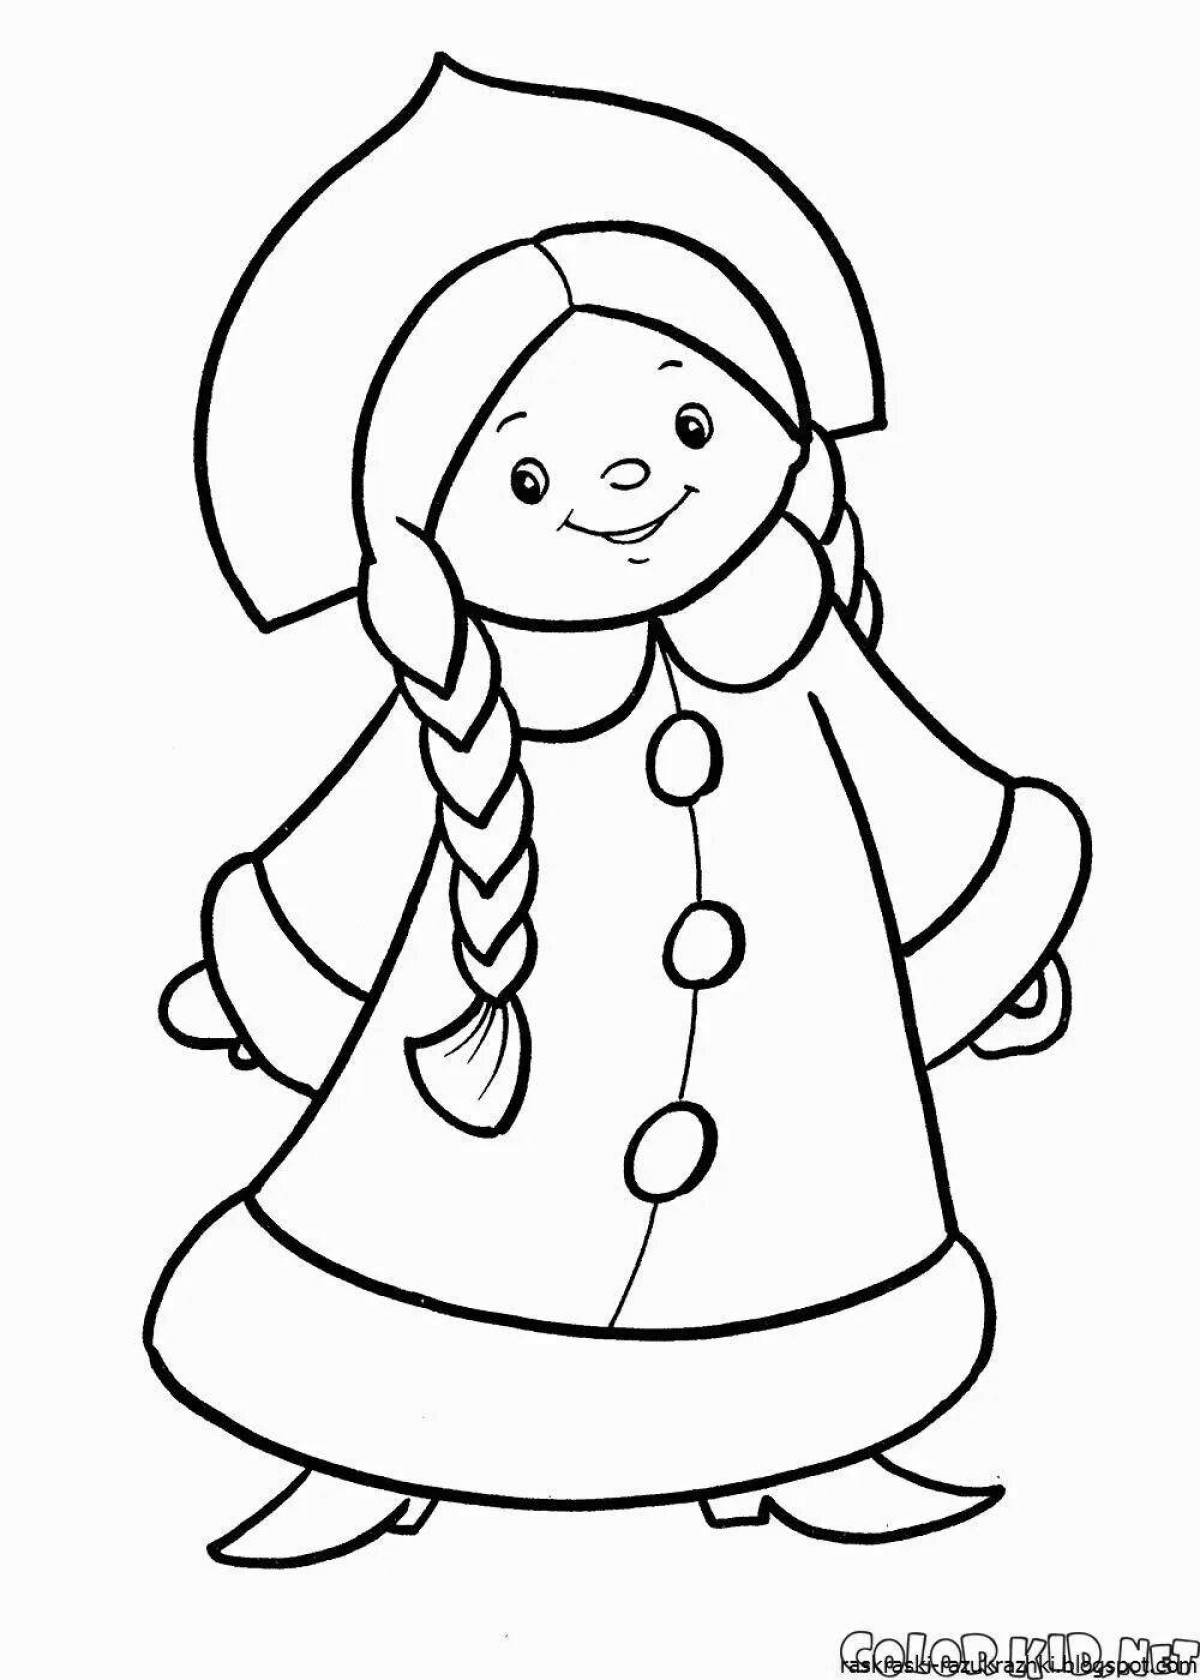 Delightful coloring of the snow maiden